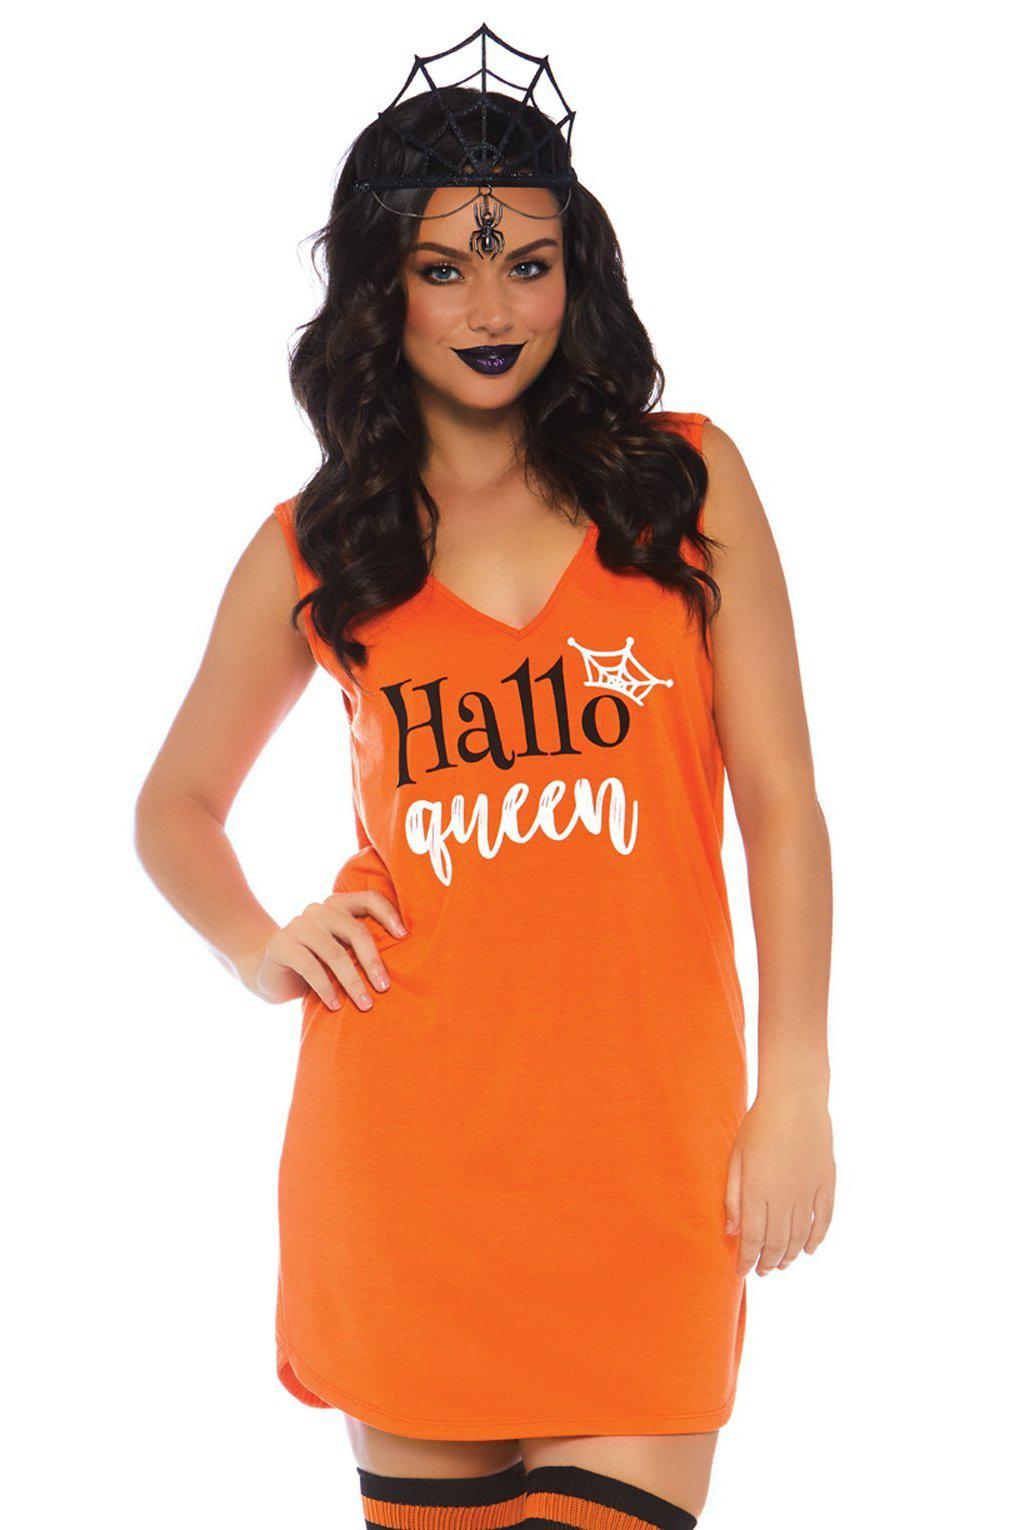 Halloqueen Jersey Dress-Other Costumes-Leg Avenue-Orange-S-SEXYSHOES.COM